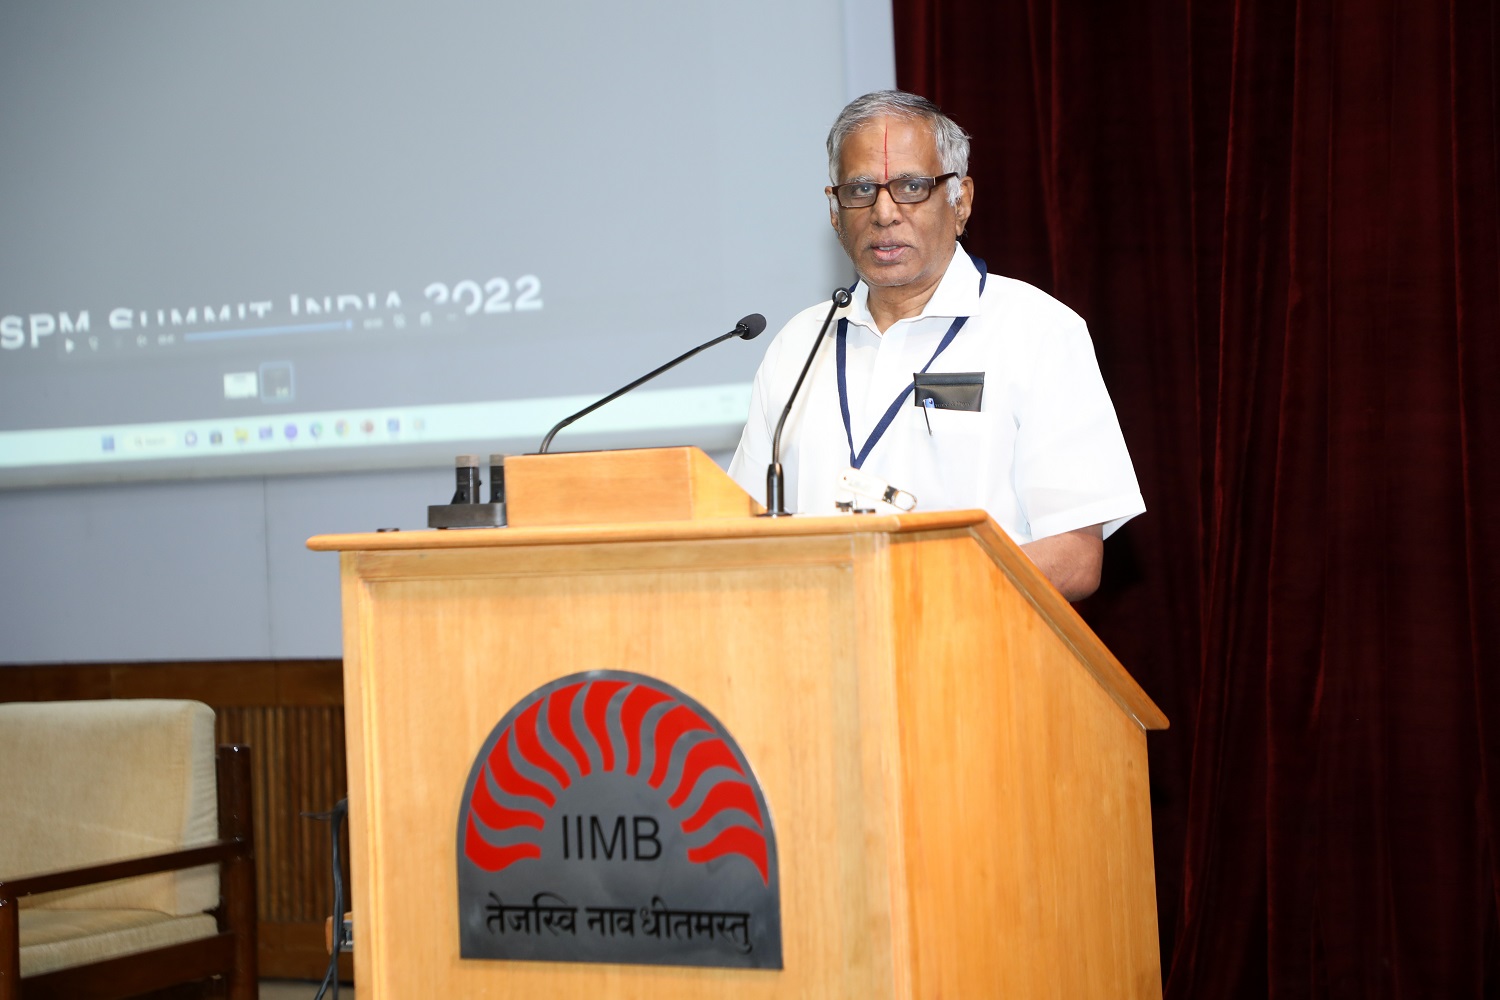 Prof. S. Sadagopan, Chairman, ISPMA India Chapter, Conference Chair – SPM Summit India 2023, delivers the welcome note to the audience on Day 1 of the summit on 3rd March 2023.